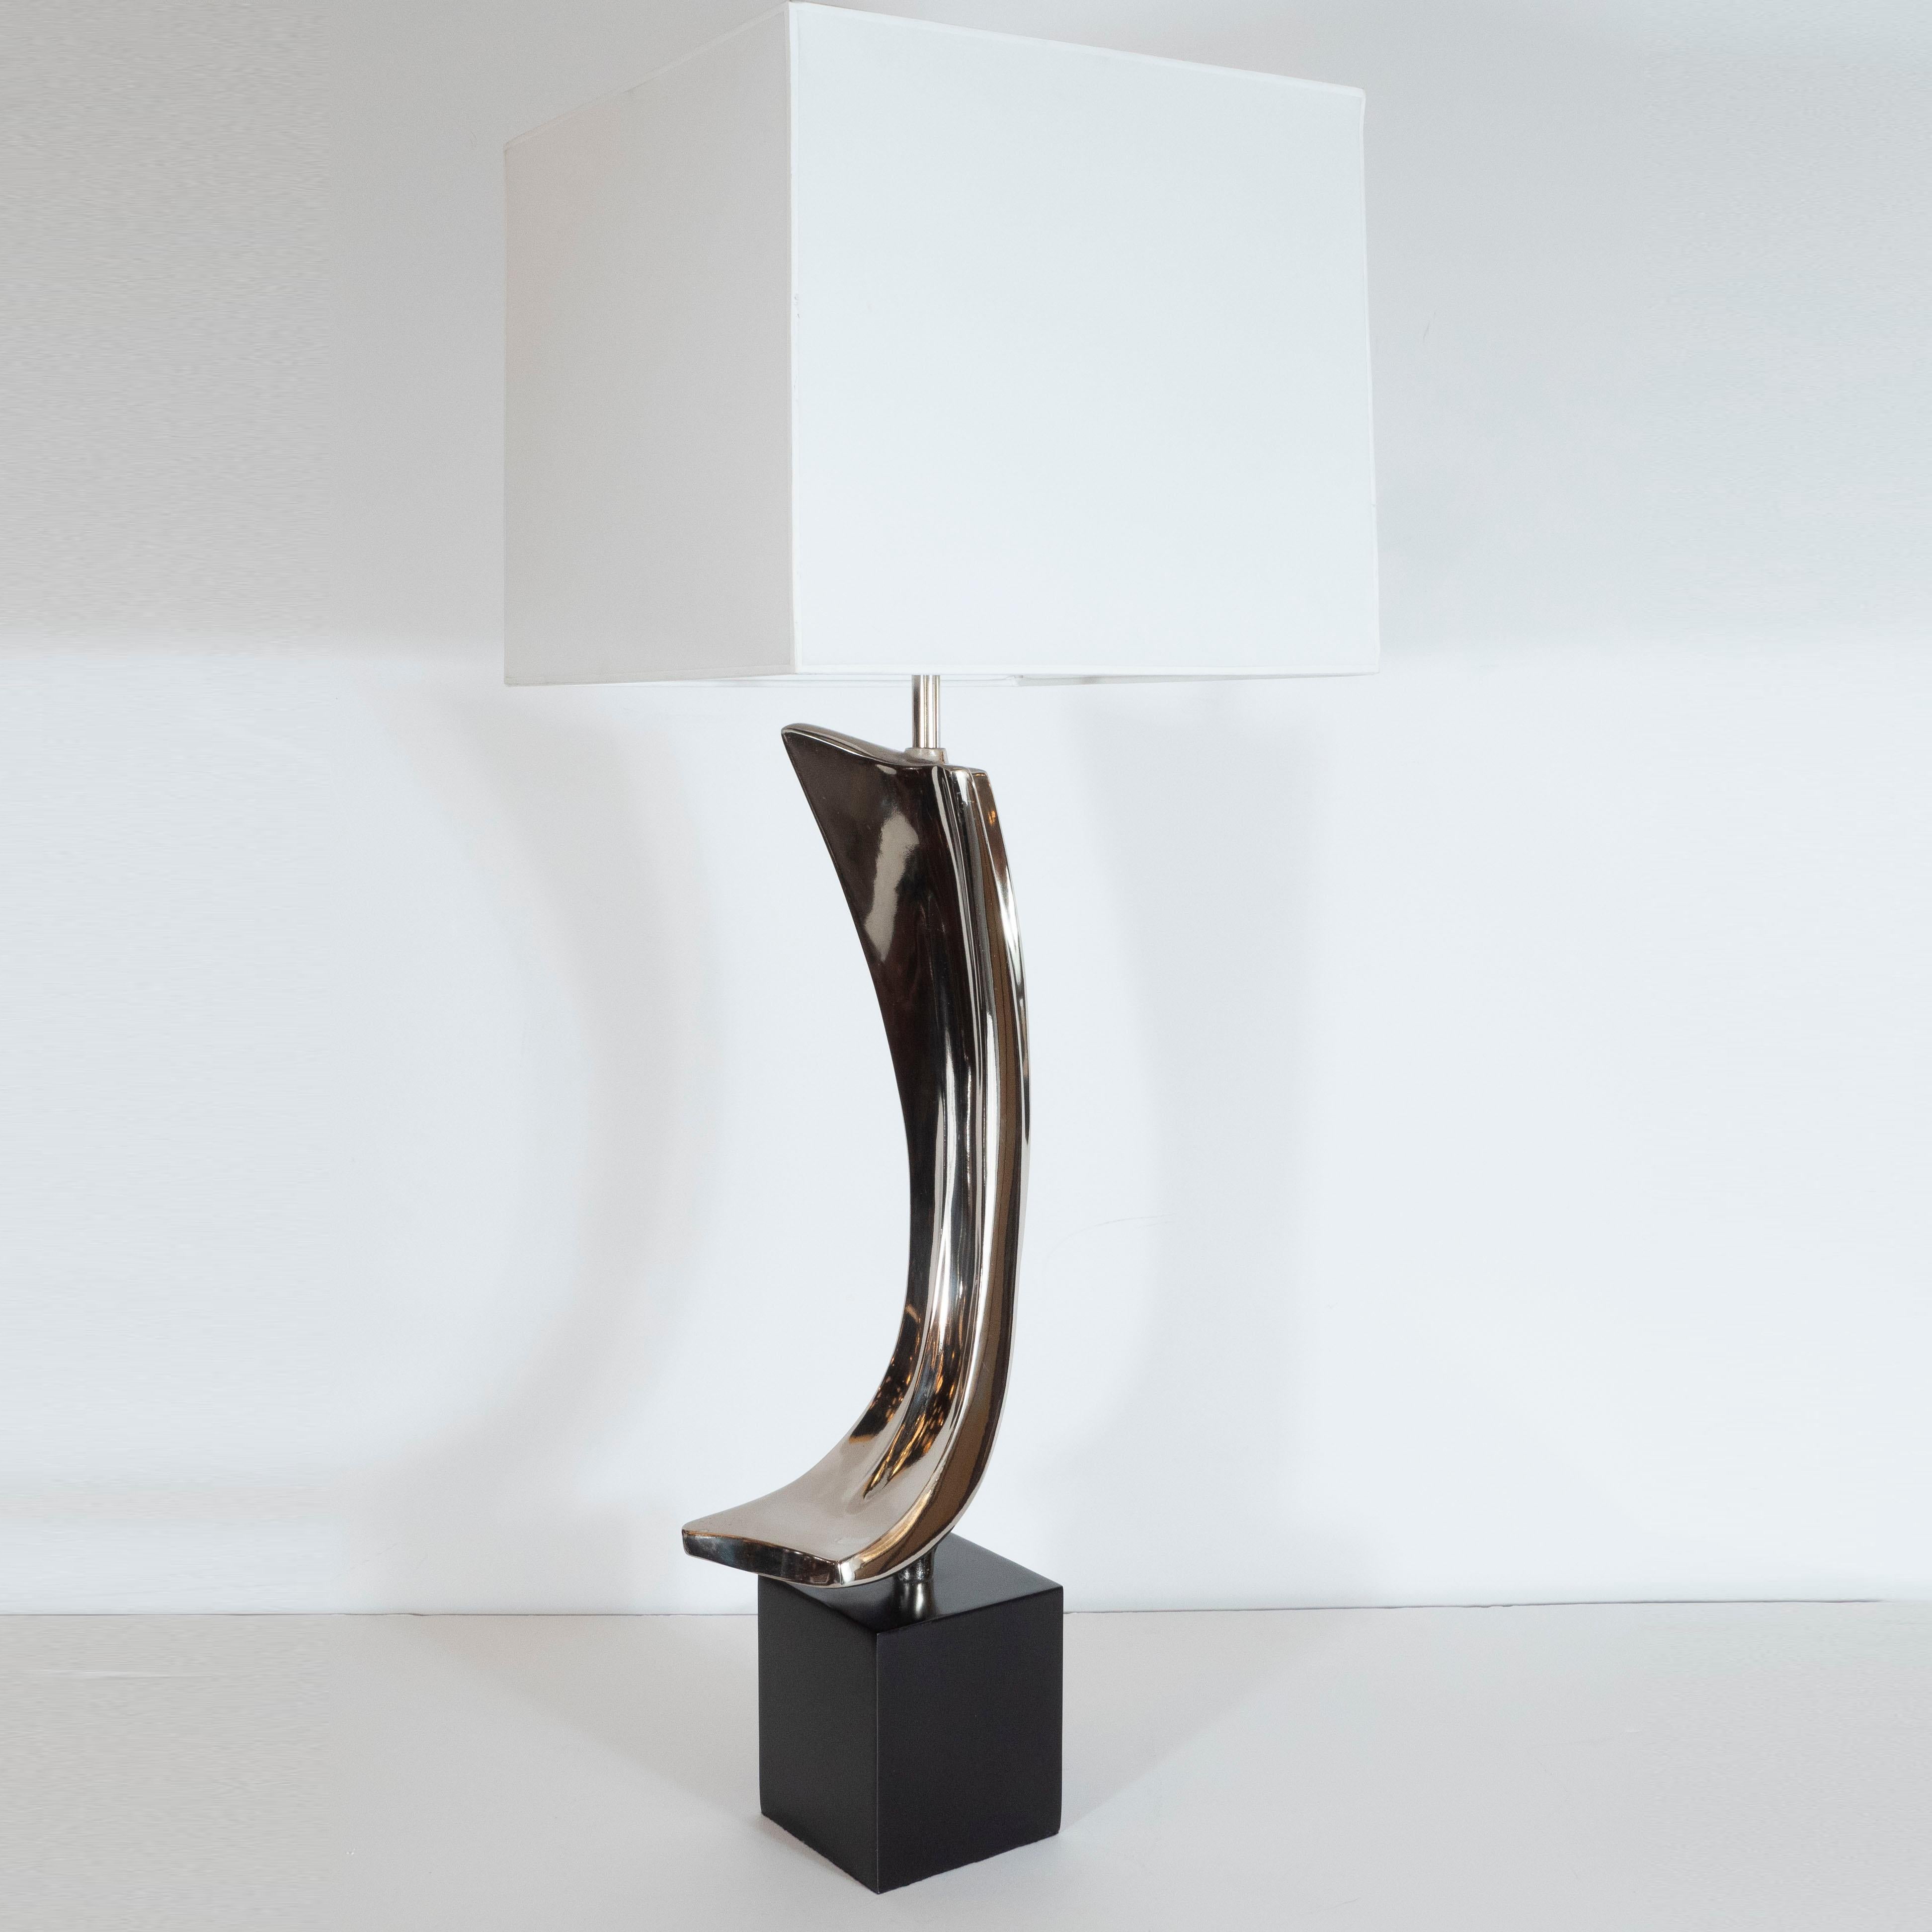 Mid-Century Modern Midcentury Brutalist Table Lamp by Weiss & Barr for Laurel Lamp Co. For Sale